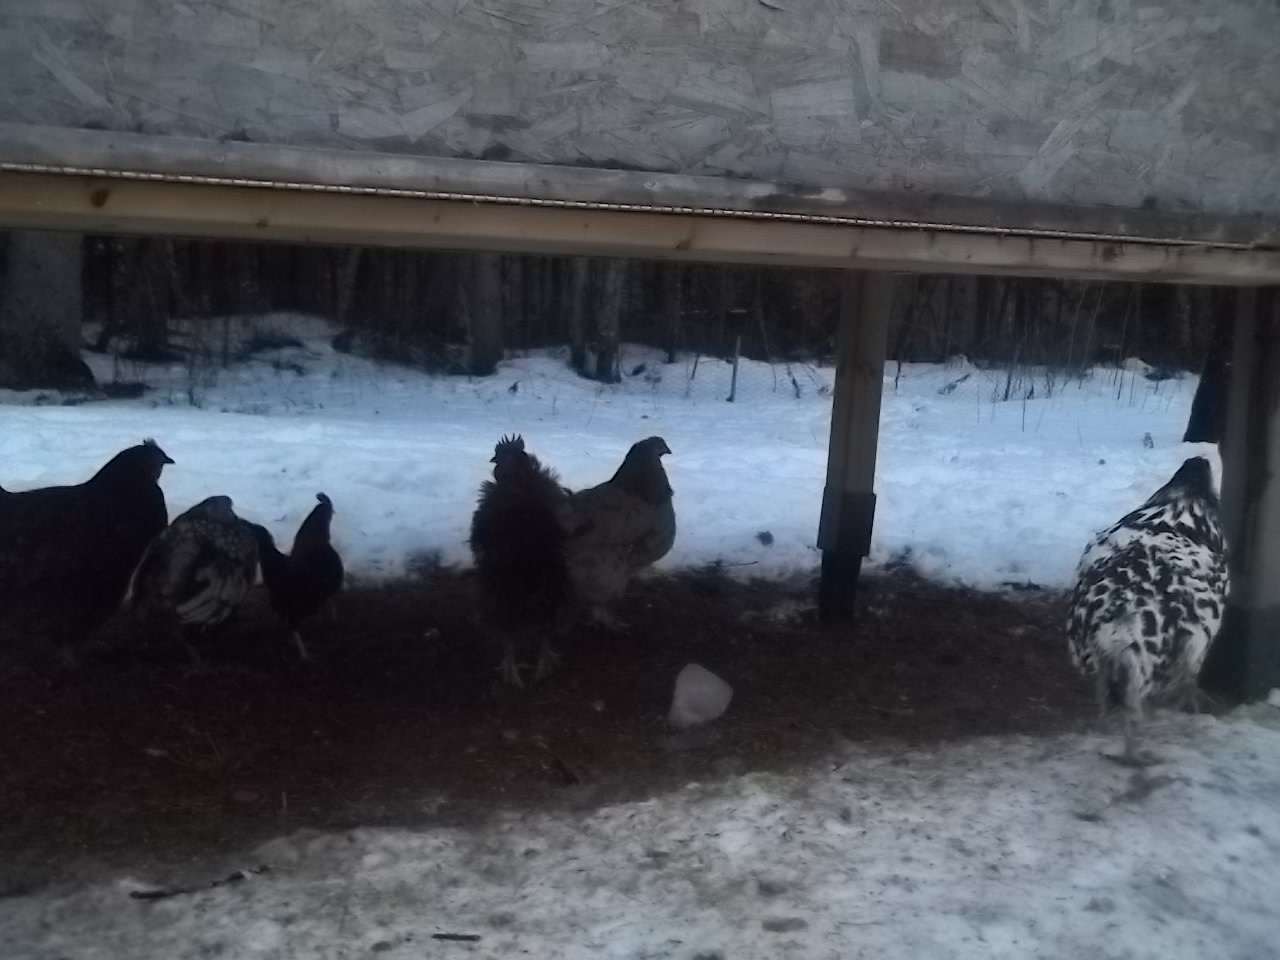 Hanging out under the coop